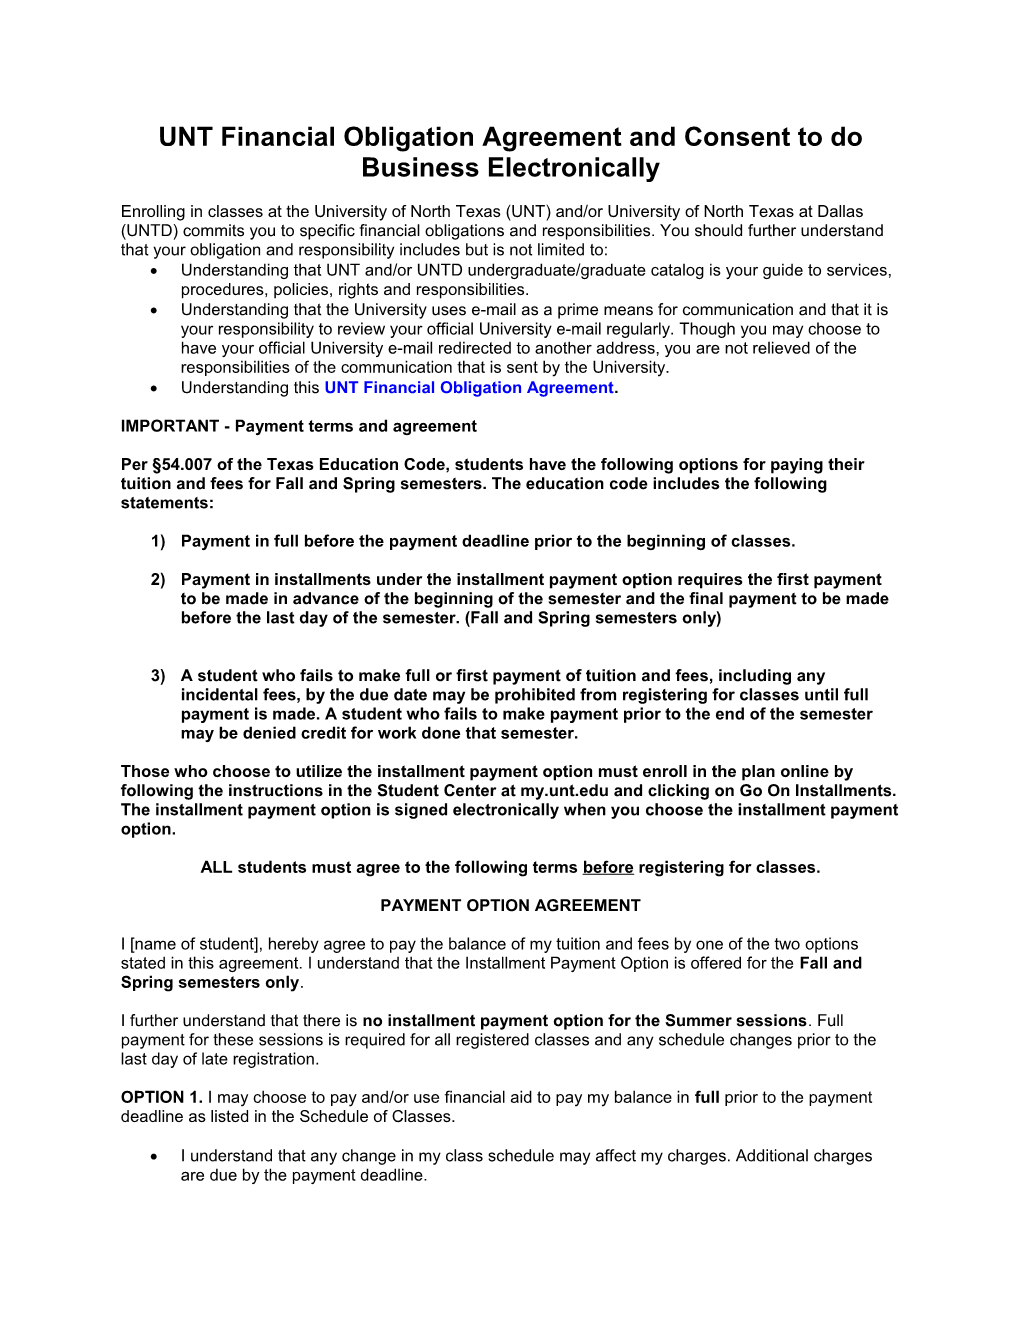 UNT Financial Obligation Agreement and Consent to Do Business Electronically